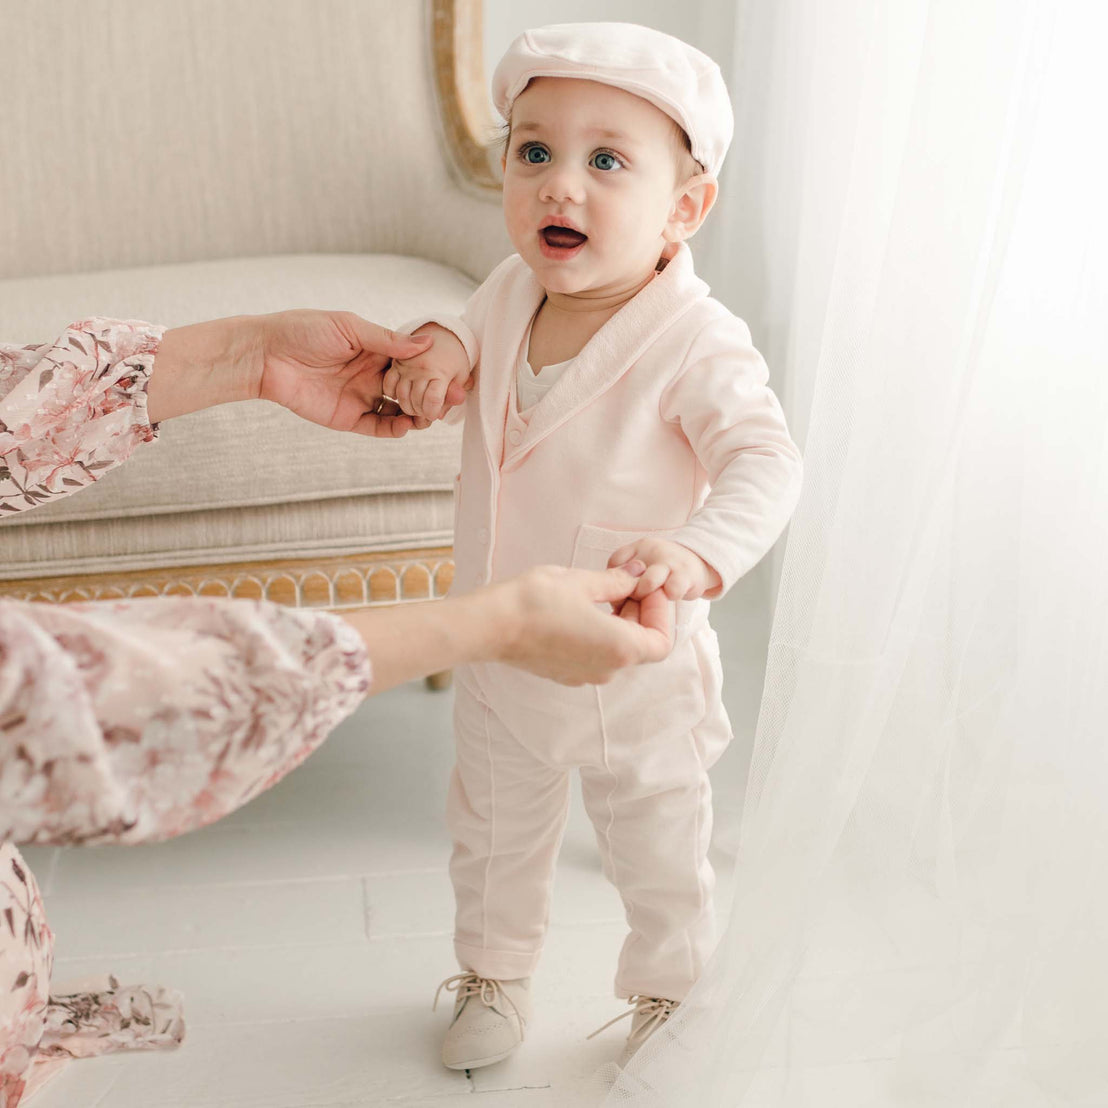 Baby boy standing in blush suit and newsboy cap